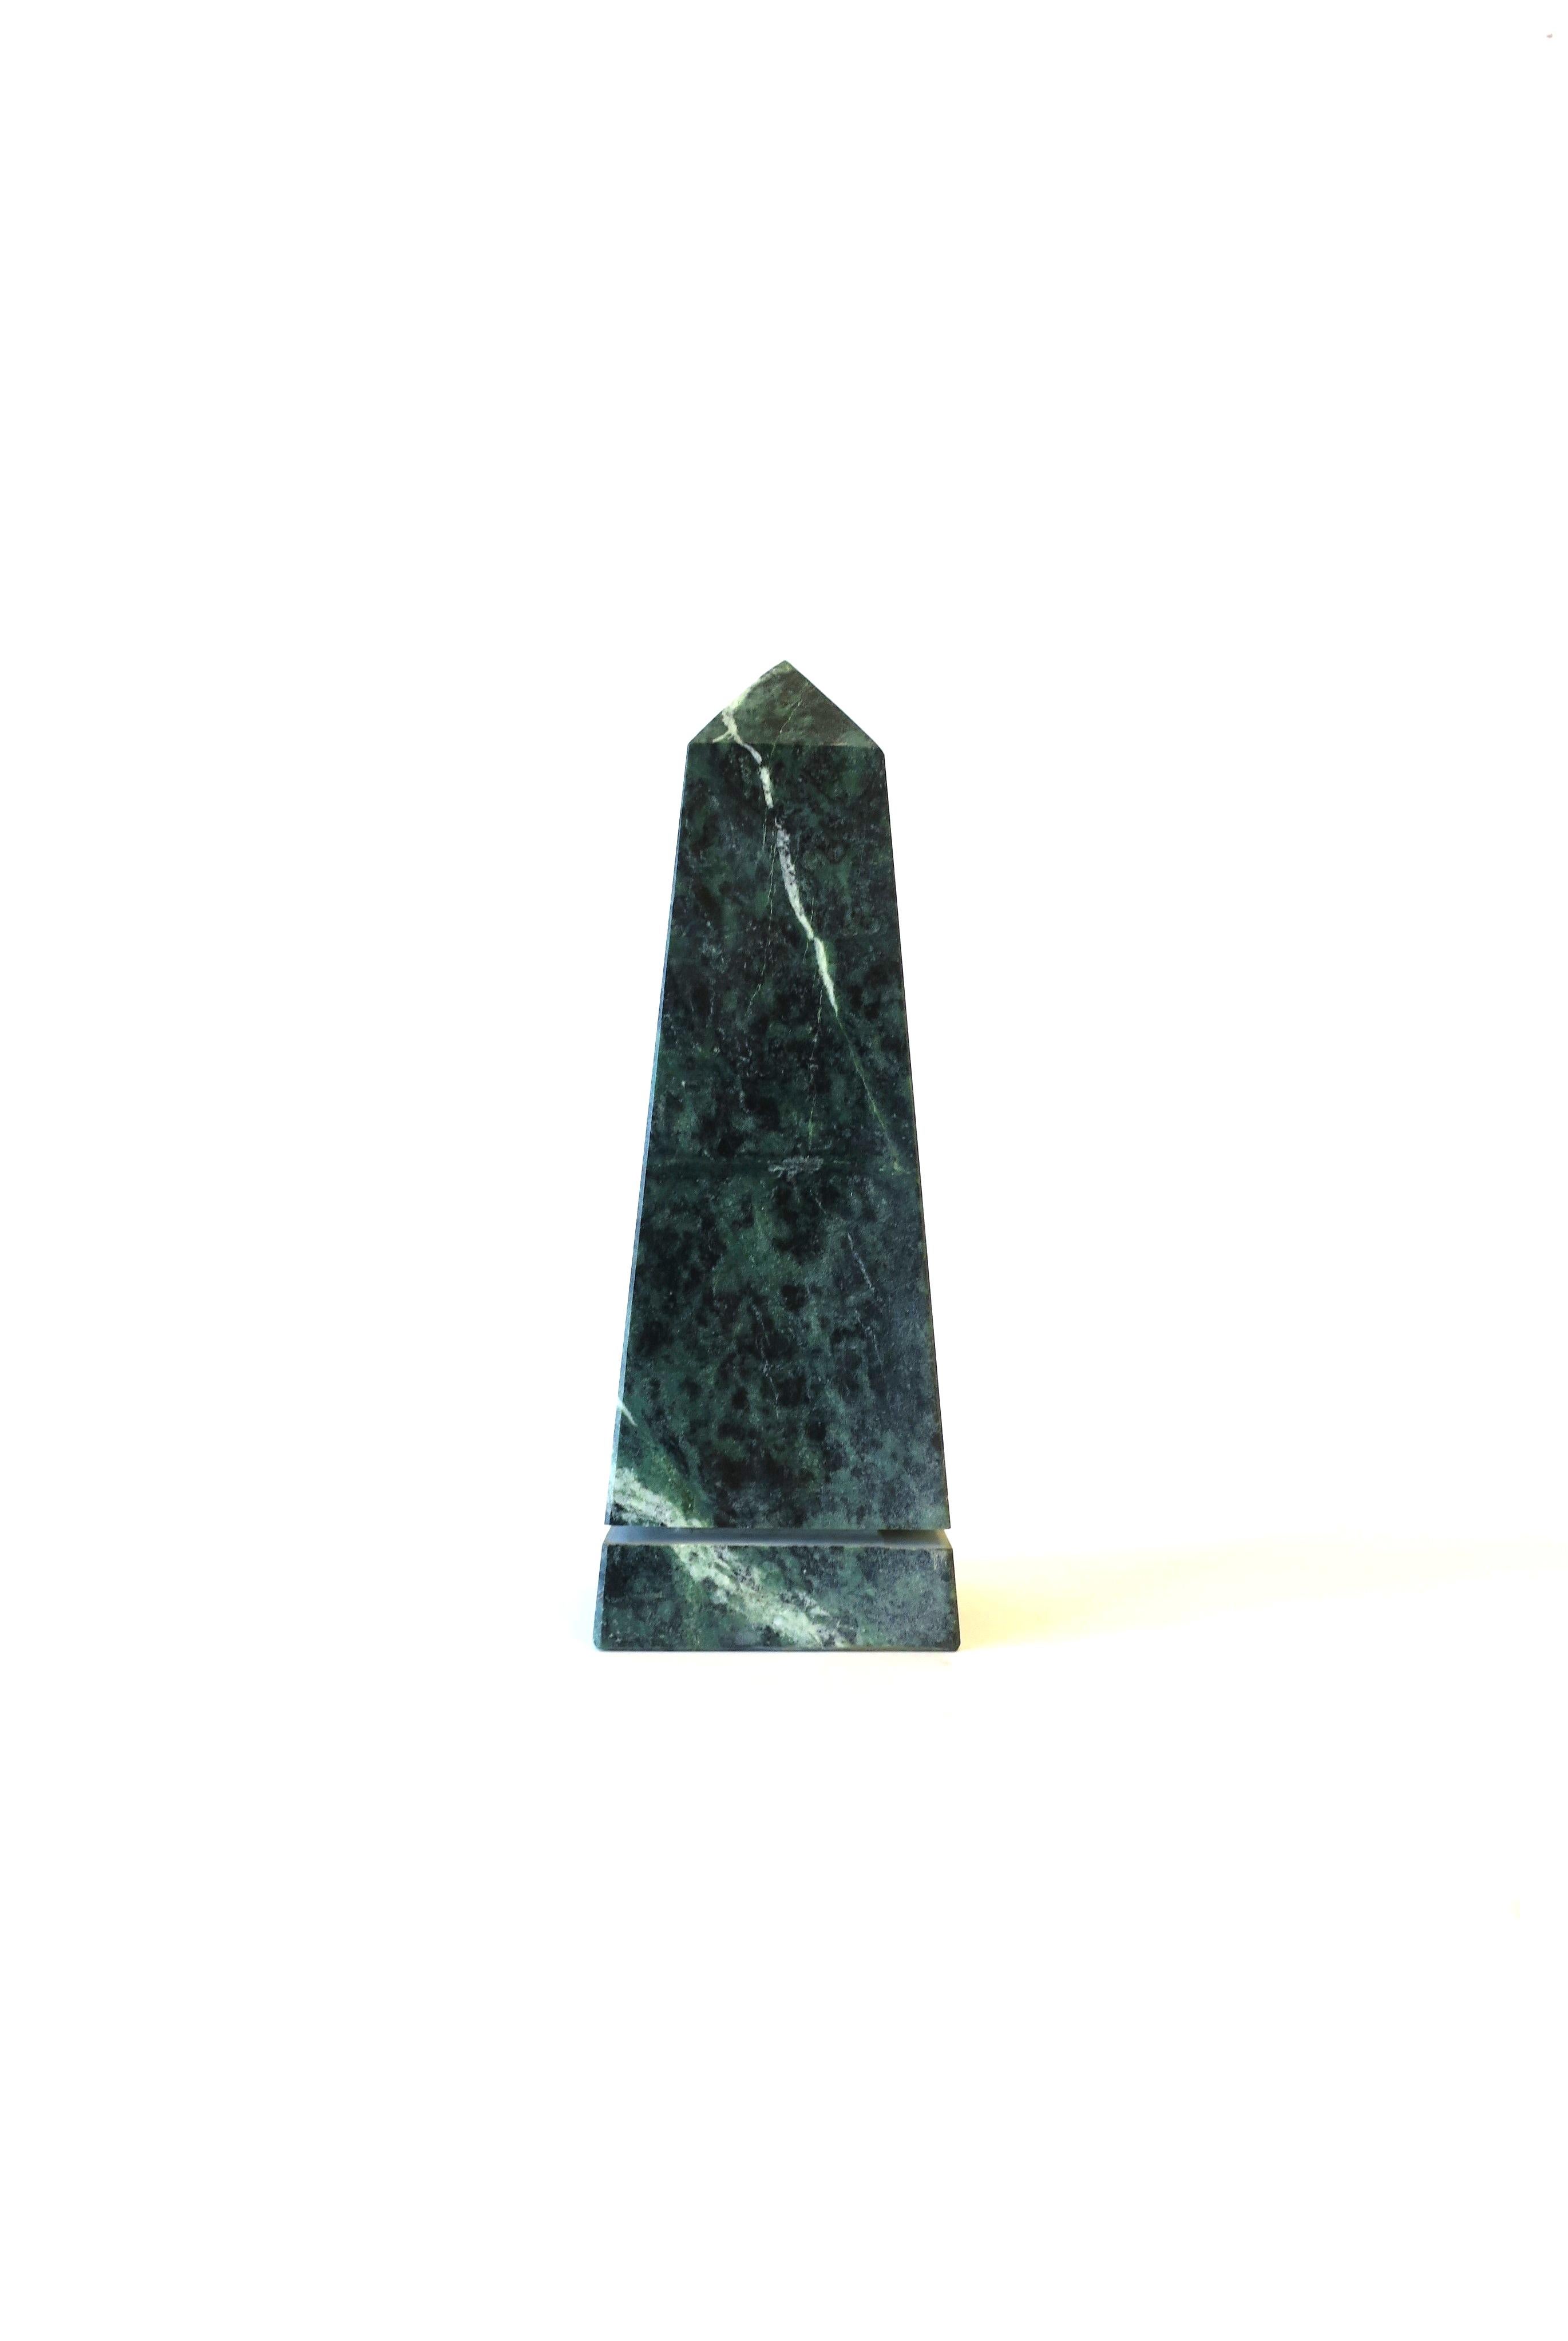 An Italian '70s modern or Post-Modern period dark green marble obelisk sculpture, circa 1970s, Italy. Obelisk is green with white veining. Very good condition as shown in images. No chips noted. Dimensions: 2.75